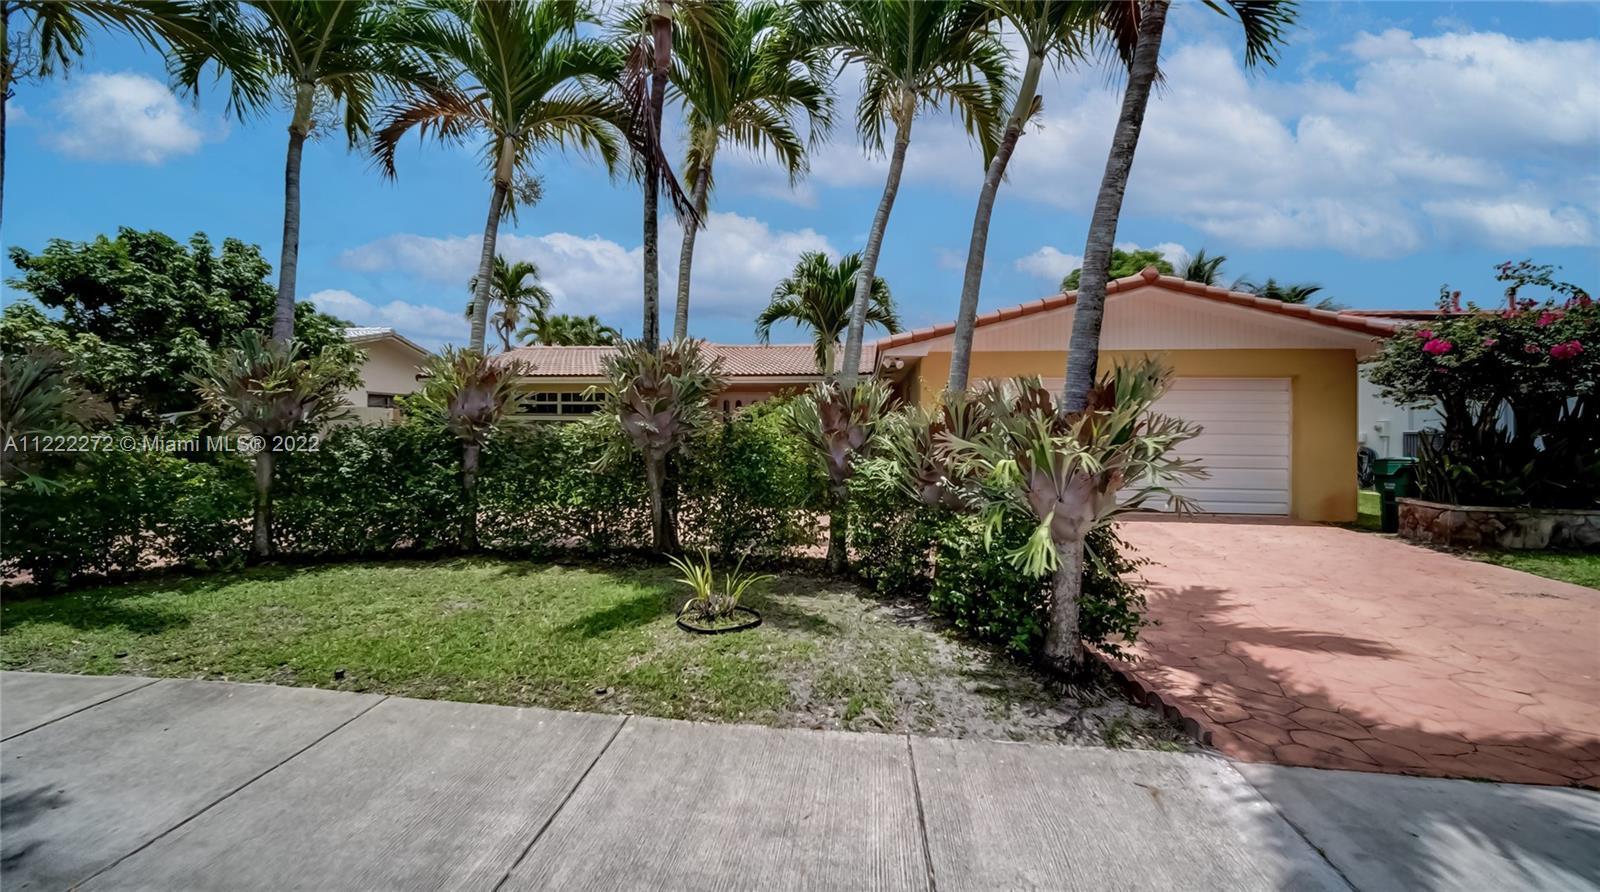 Photo of 7310 Loch Ness Dr in Miami Lakes, FL